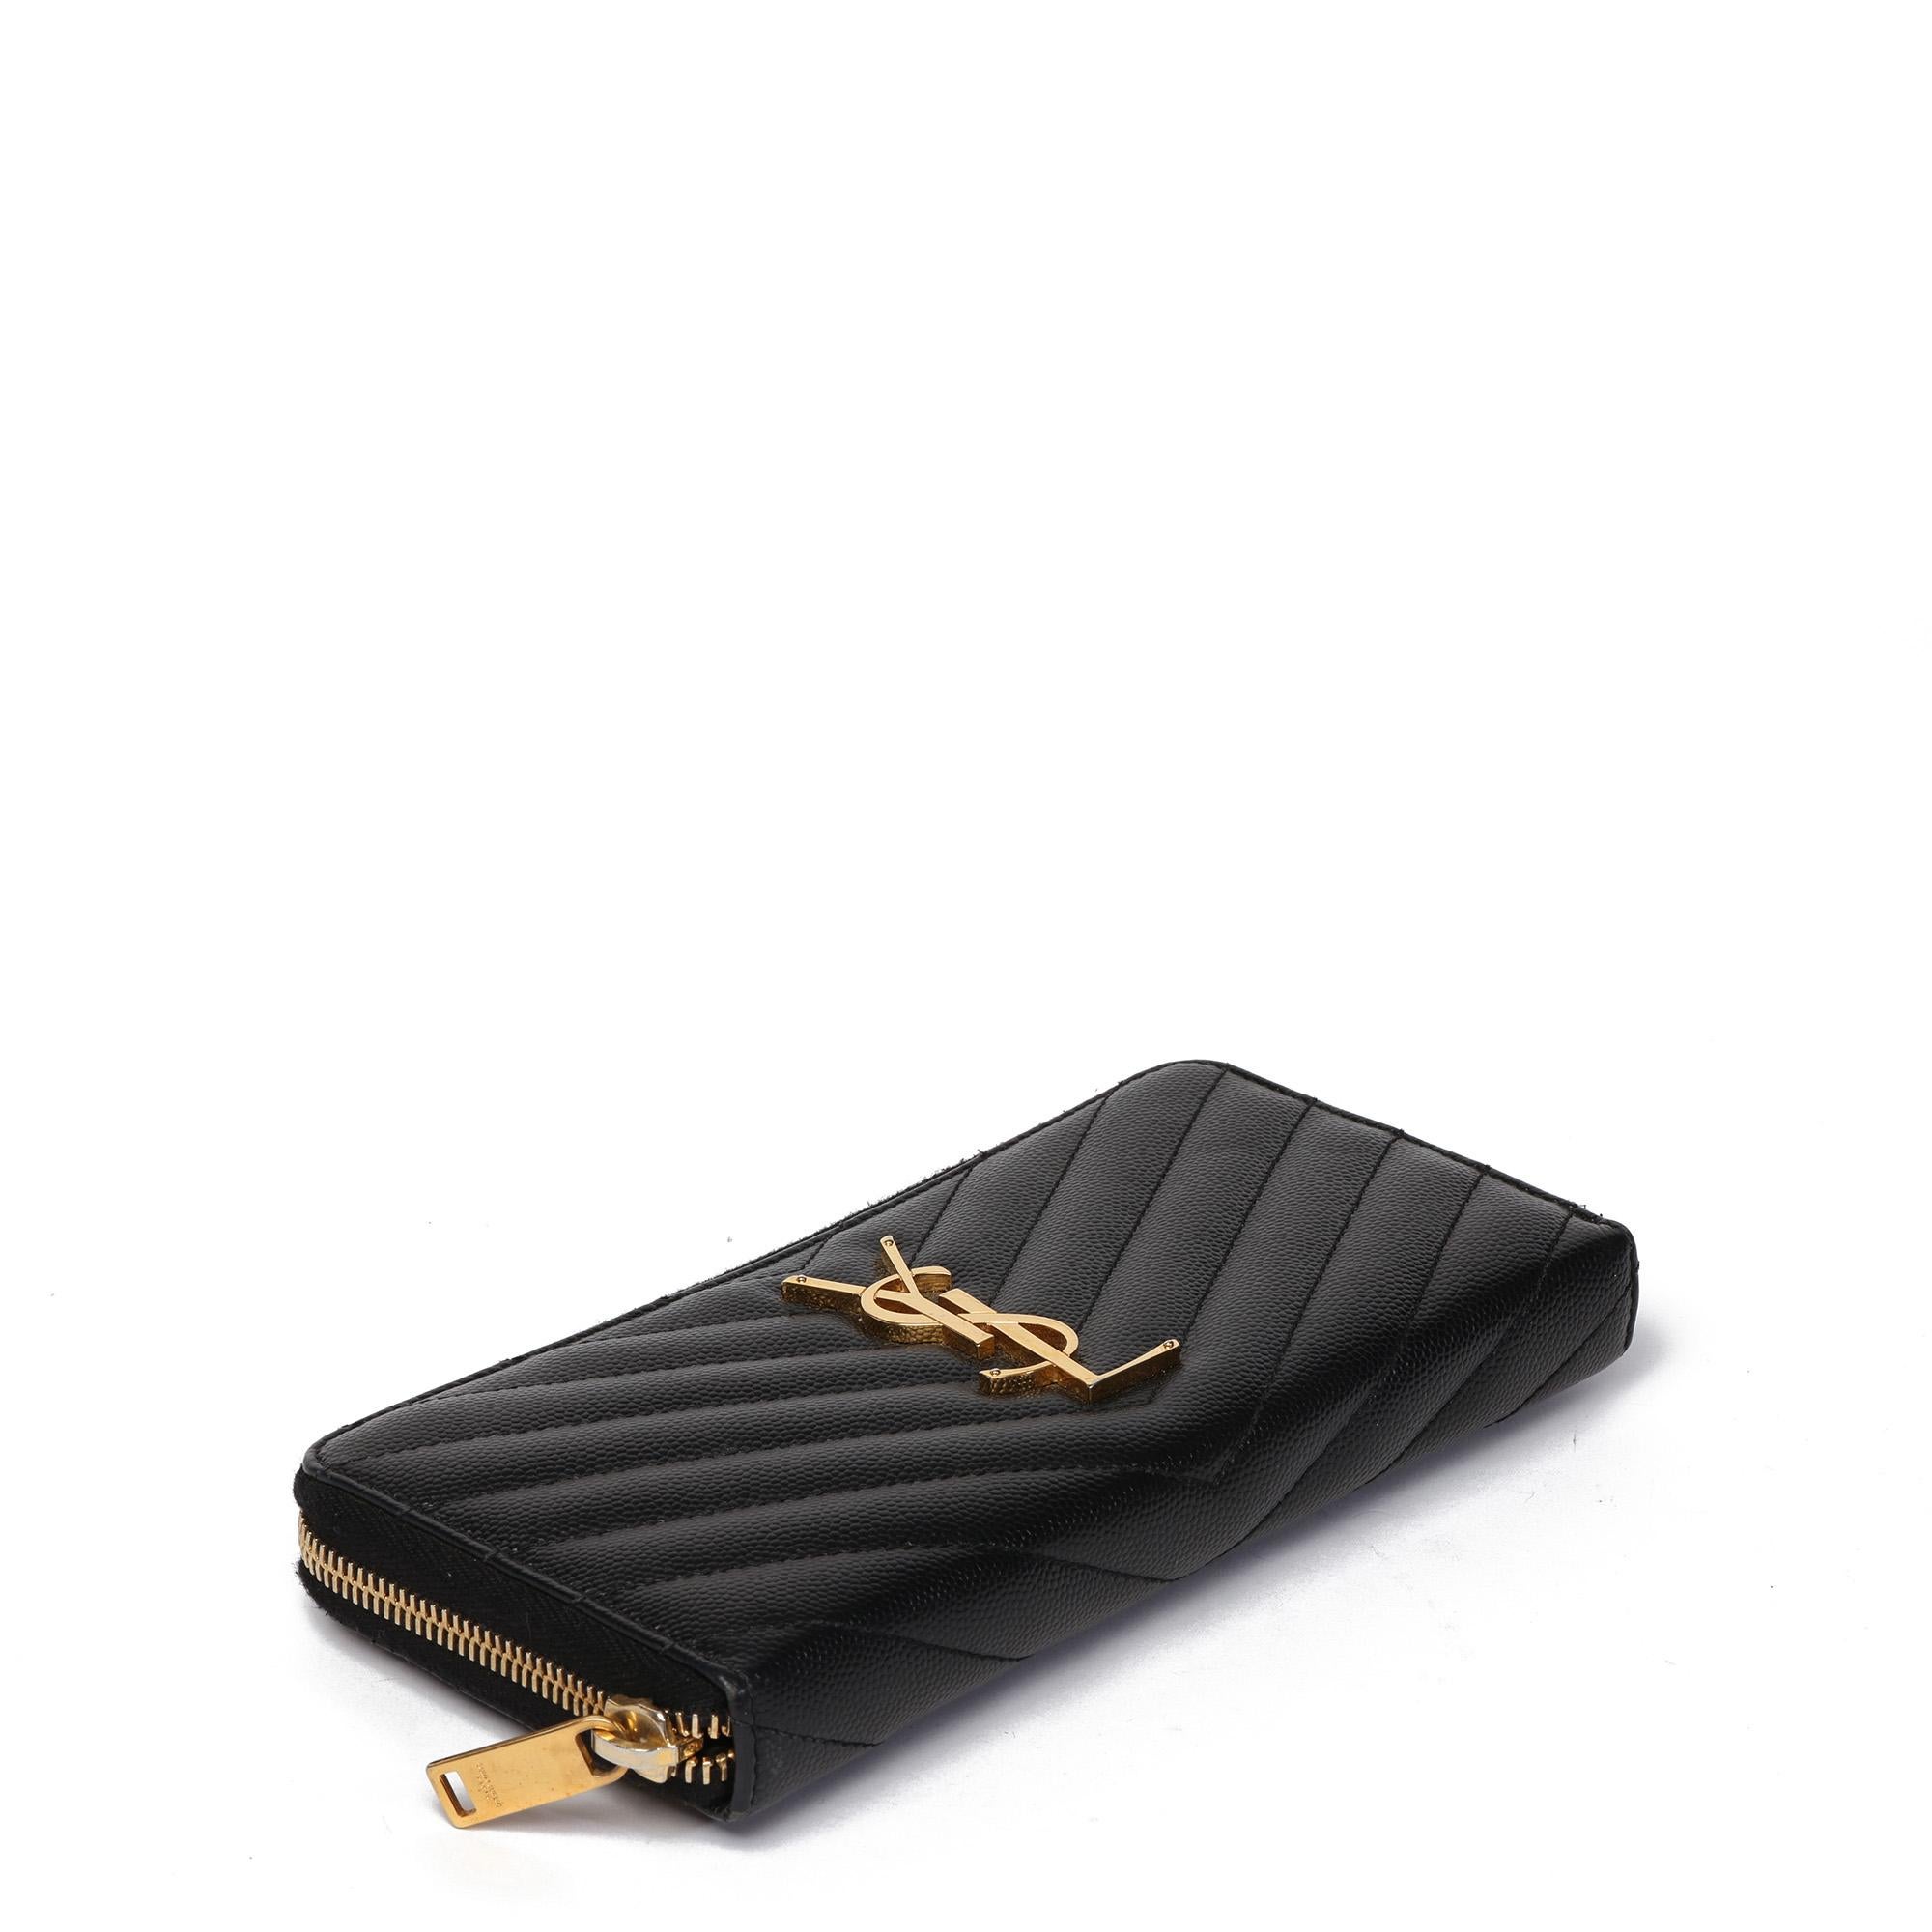 Saint Laurent Black Grain De Poudre Embossed Leather Cassandre Matelassè Zip Around Wallet

CONDITION NOTES
The exterior is in very good condition with minimal signs of use.
The interior is in very good condition with minimal signs of use.
The